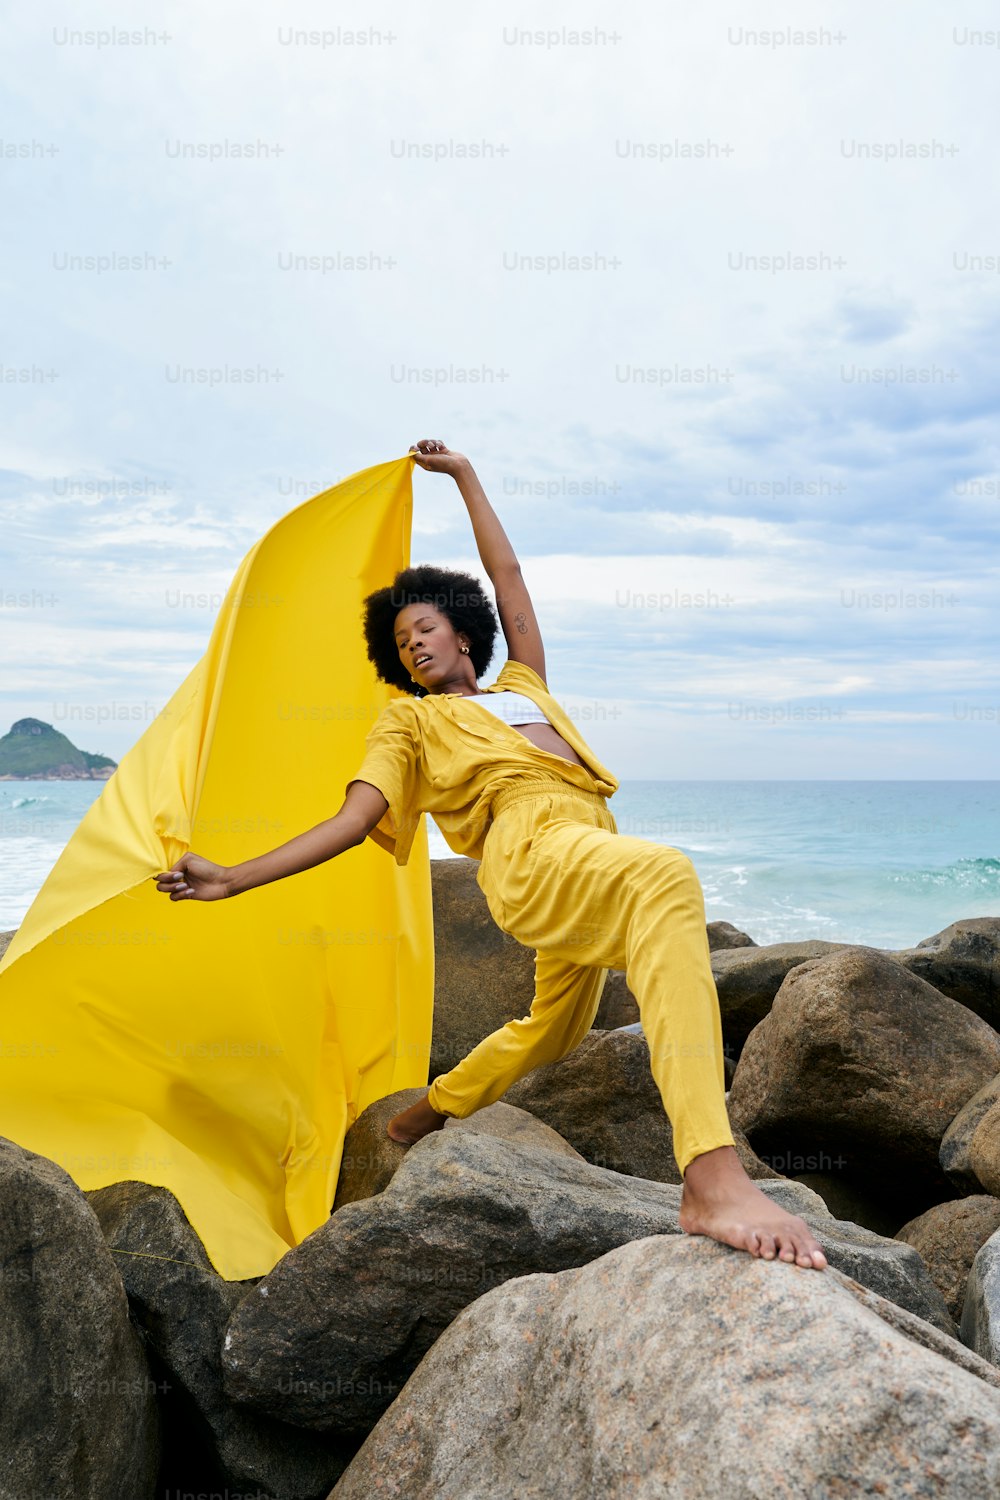 a woman in a yellow outfit standing on rocks near the ocean